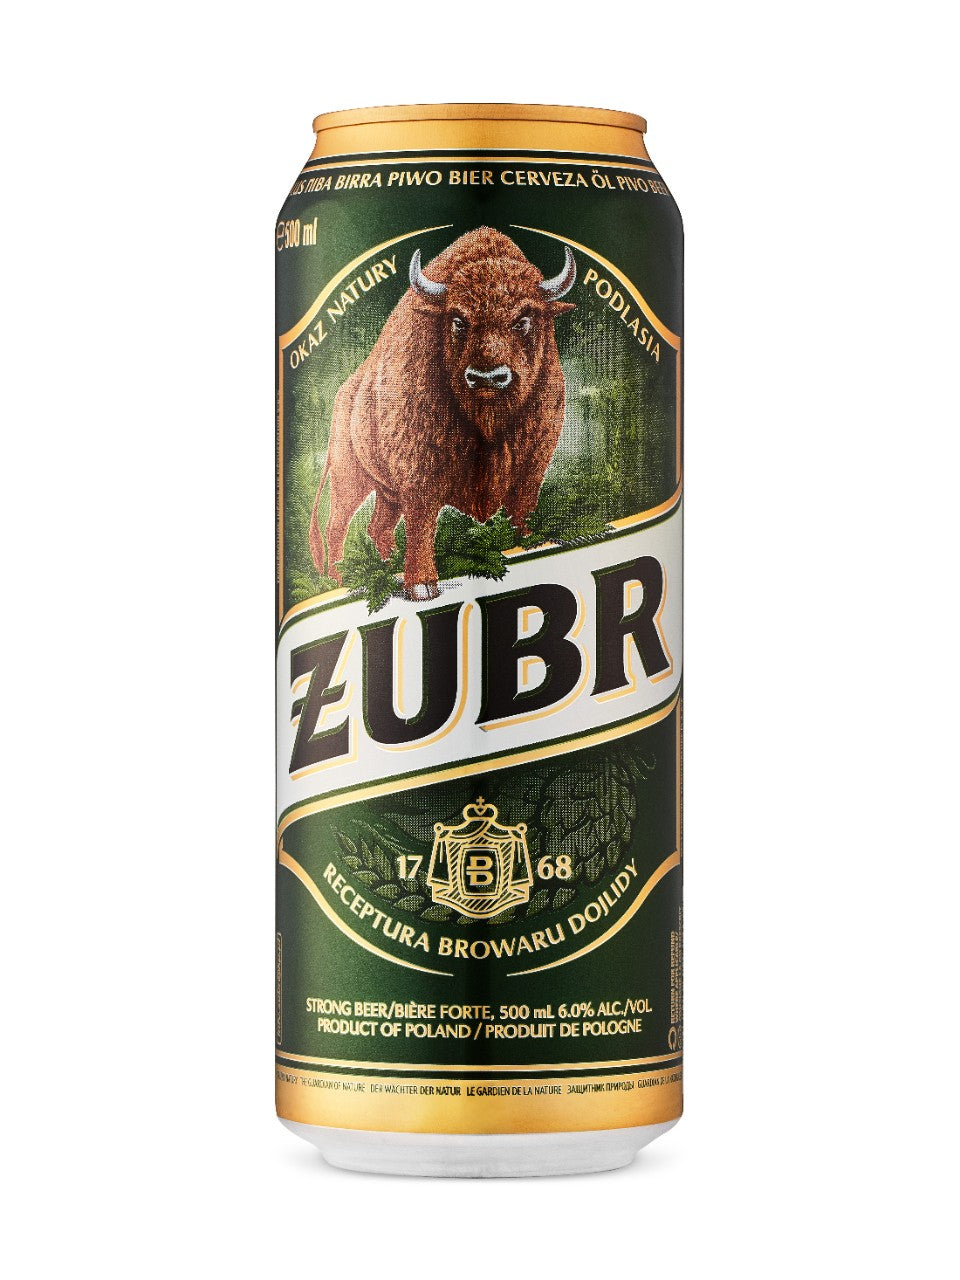 Zubr 500 mL can